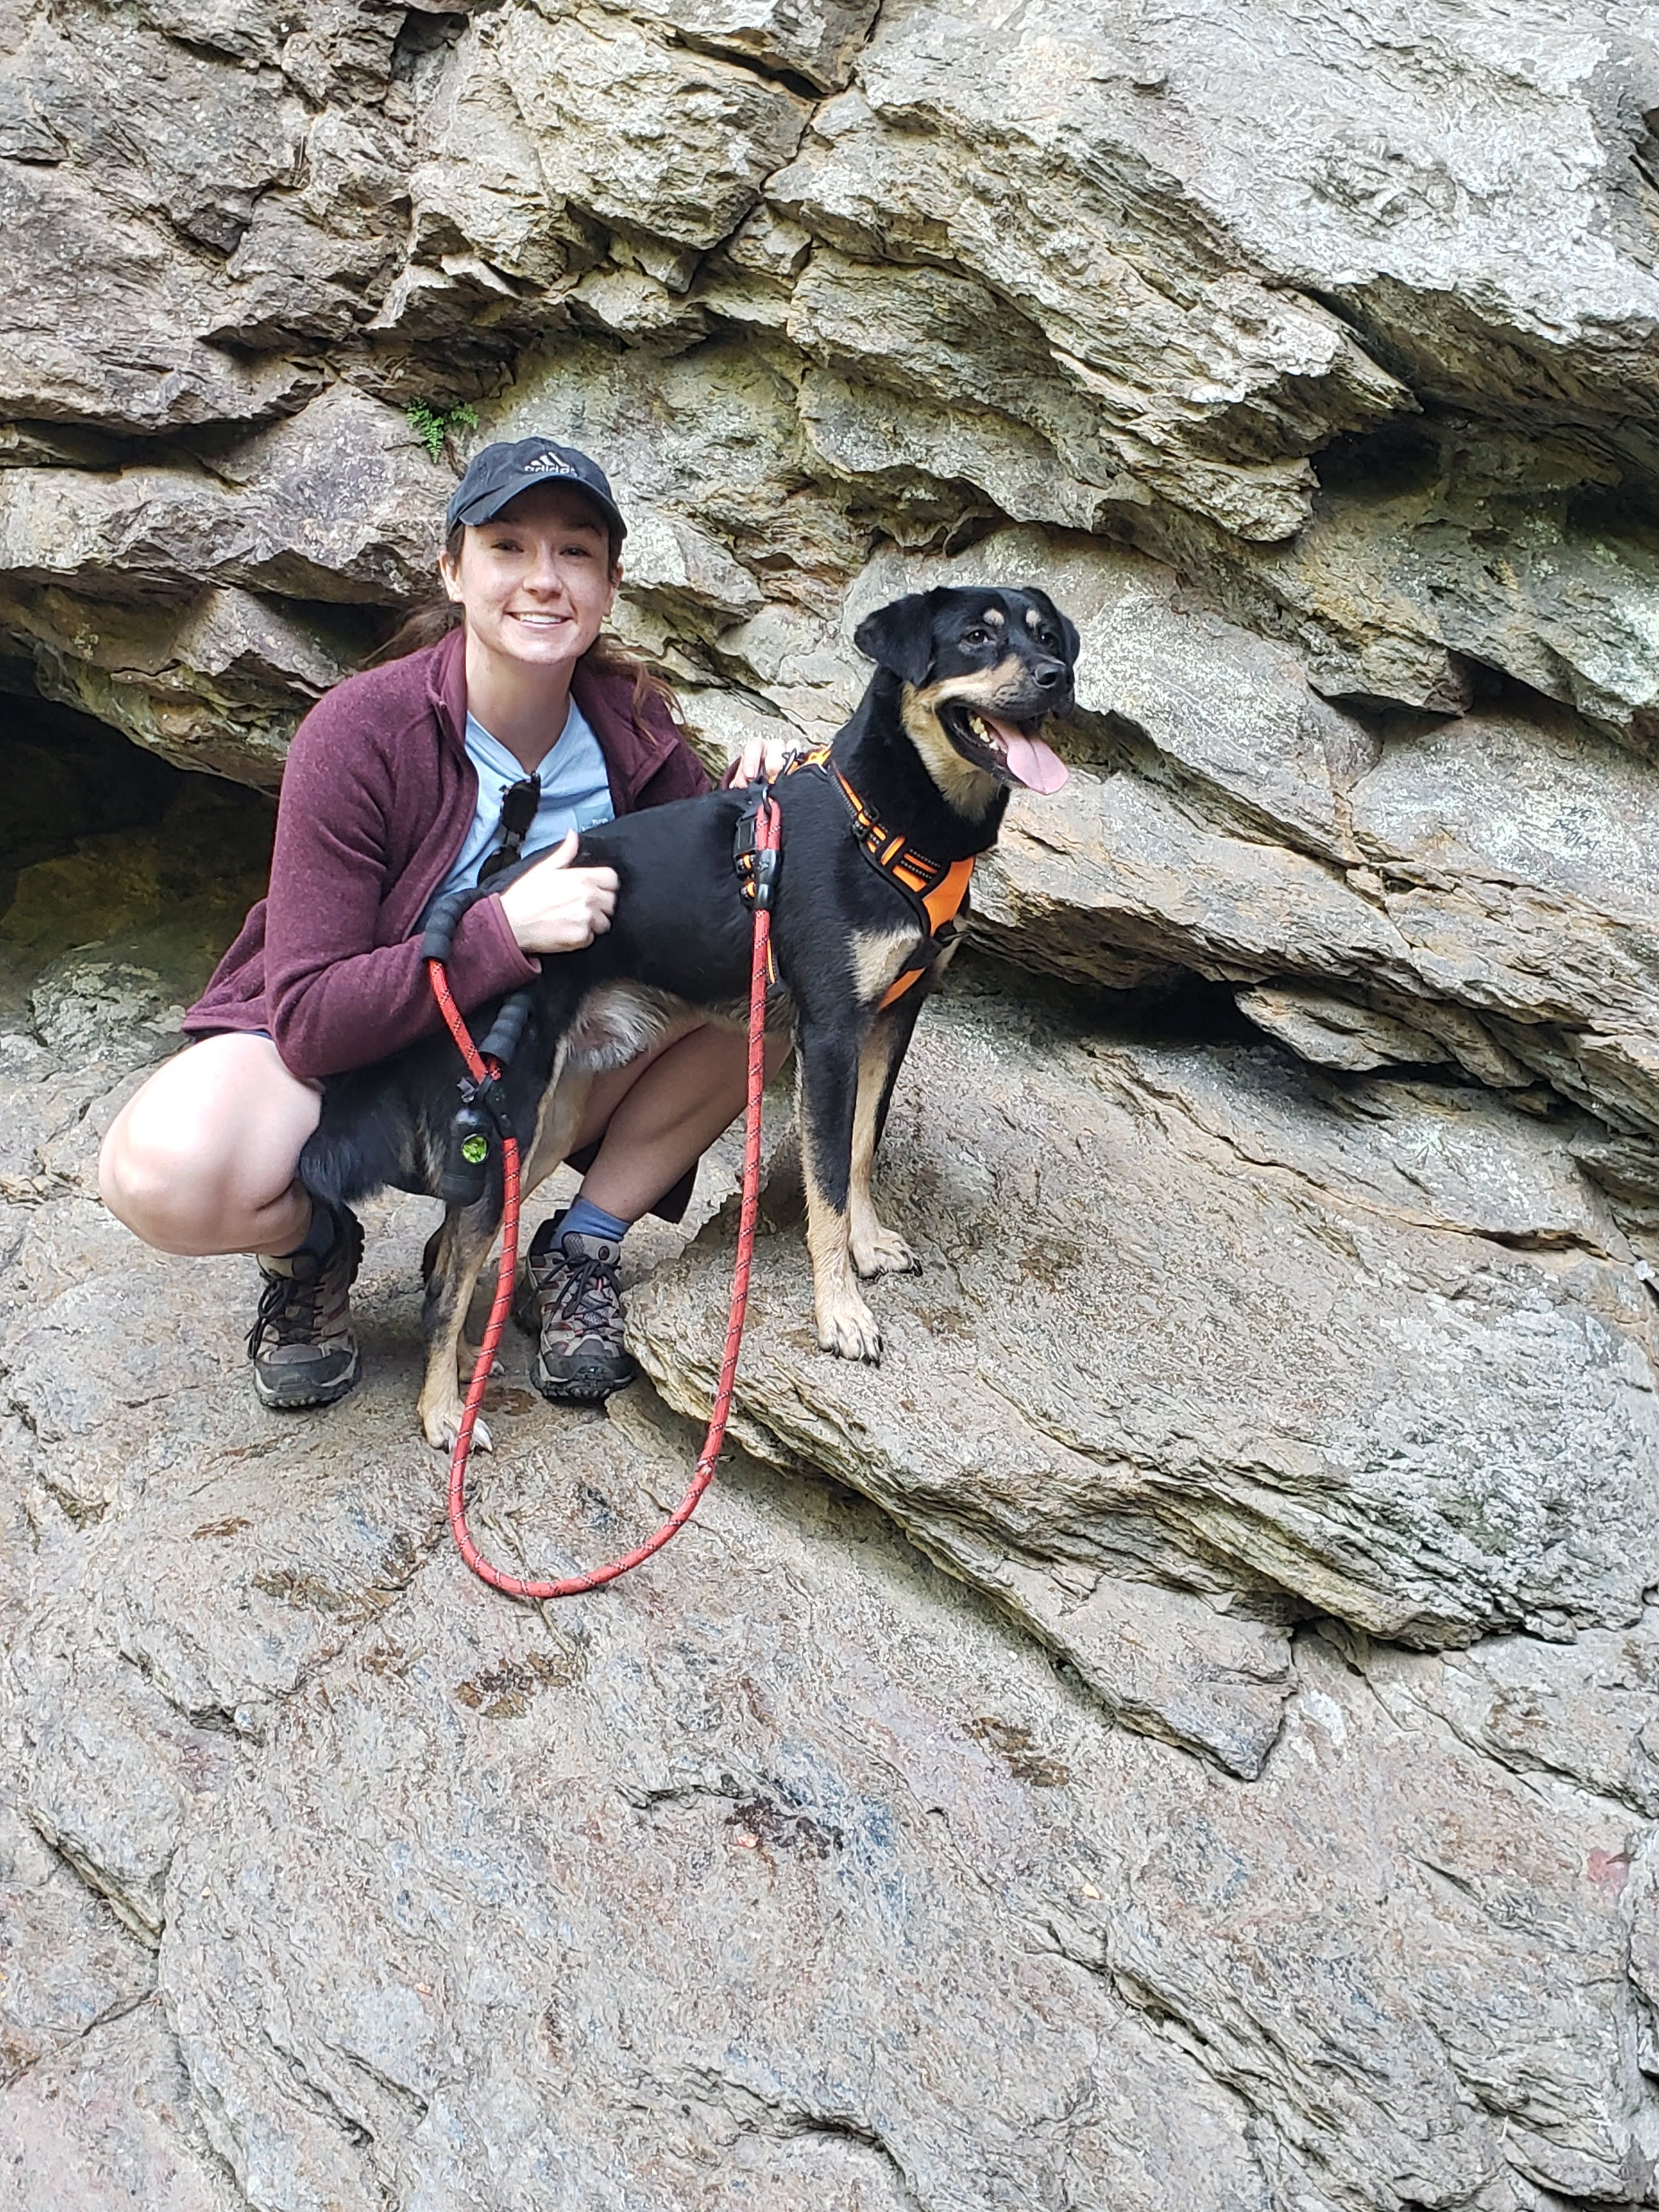 Sarah Zwicker is pictured with her dog Cooper on a hiking trip.